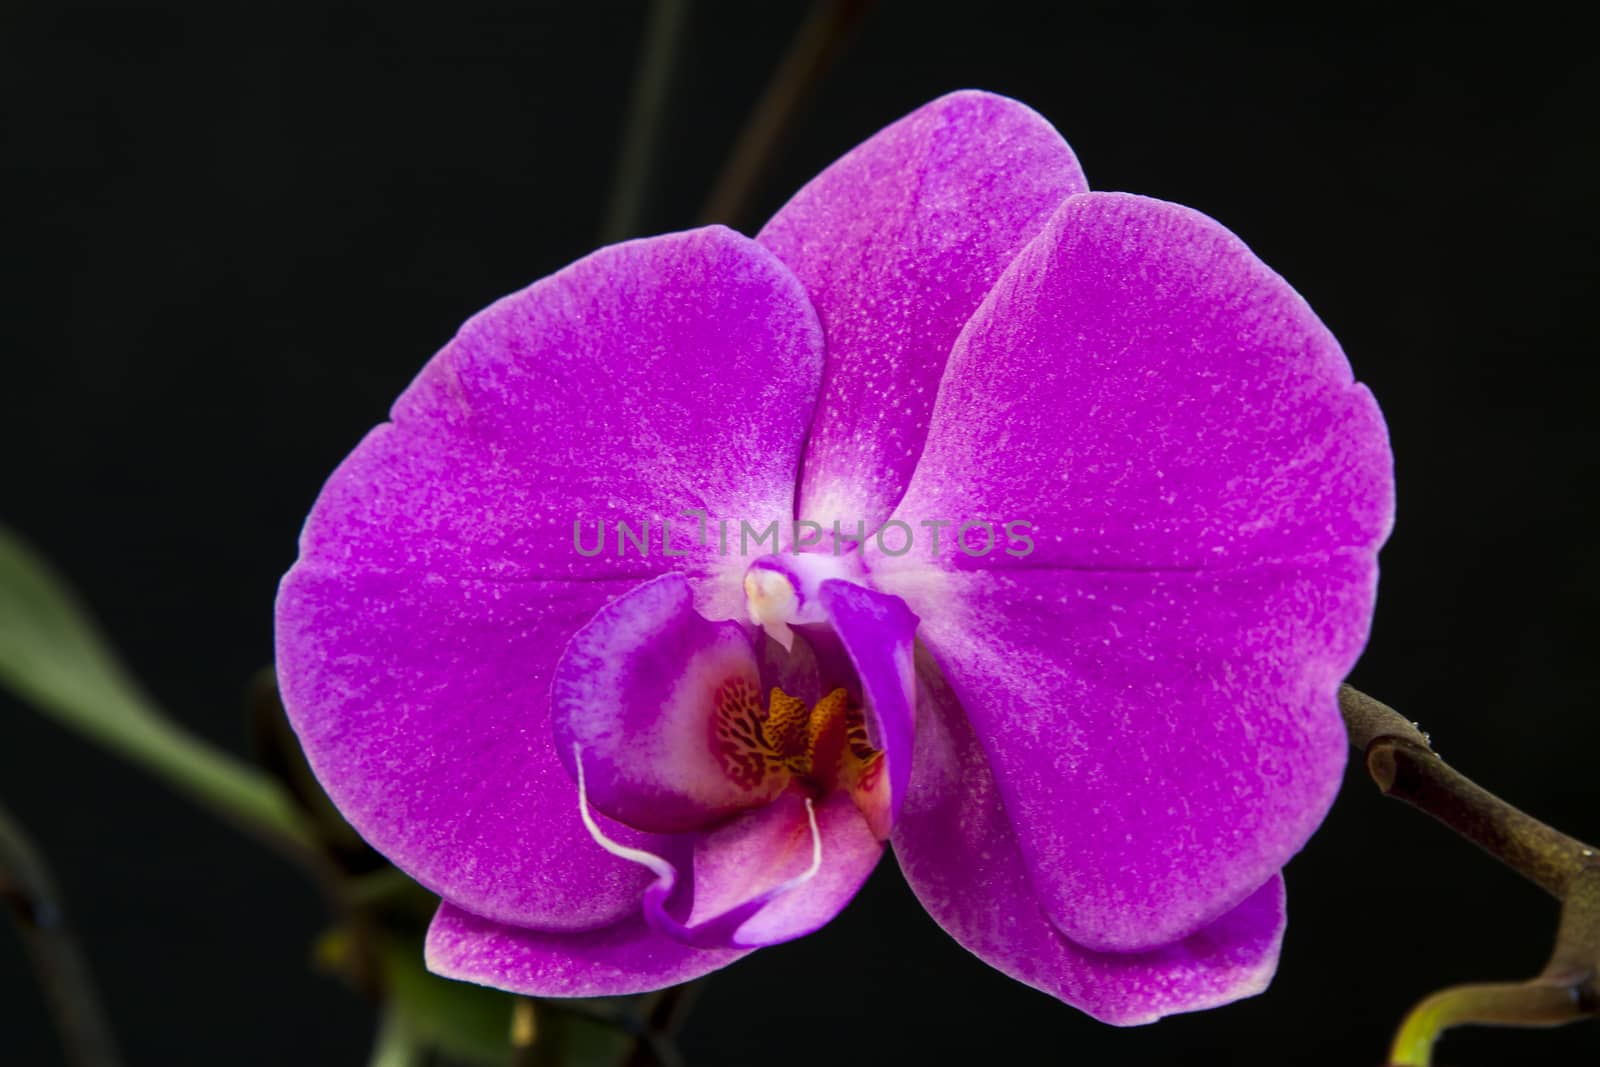 Close up view of orchid on black background